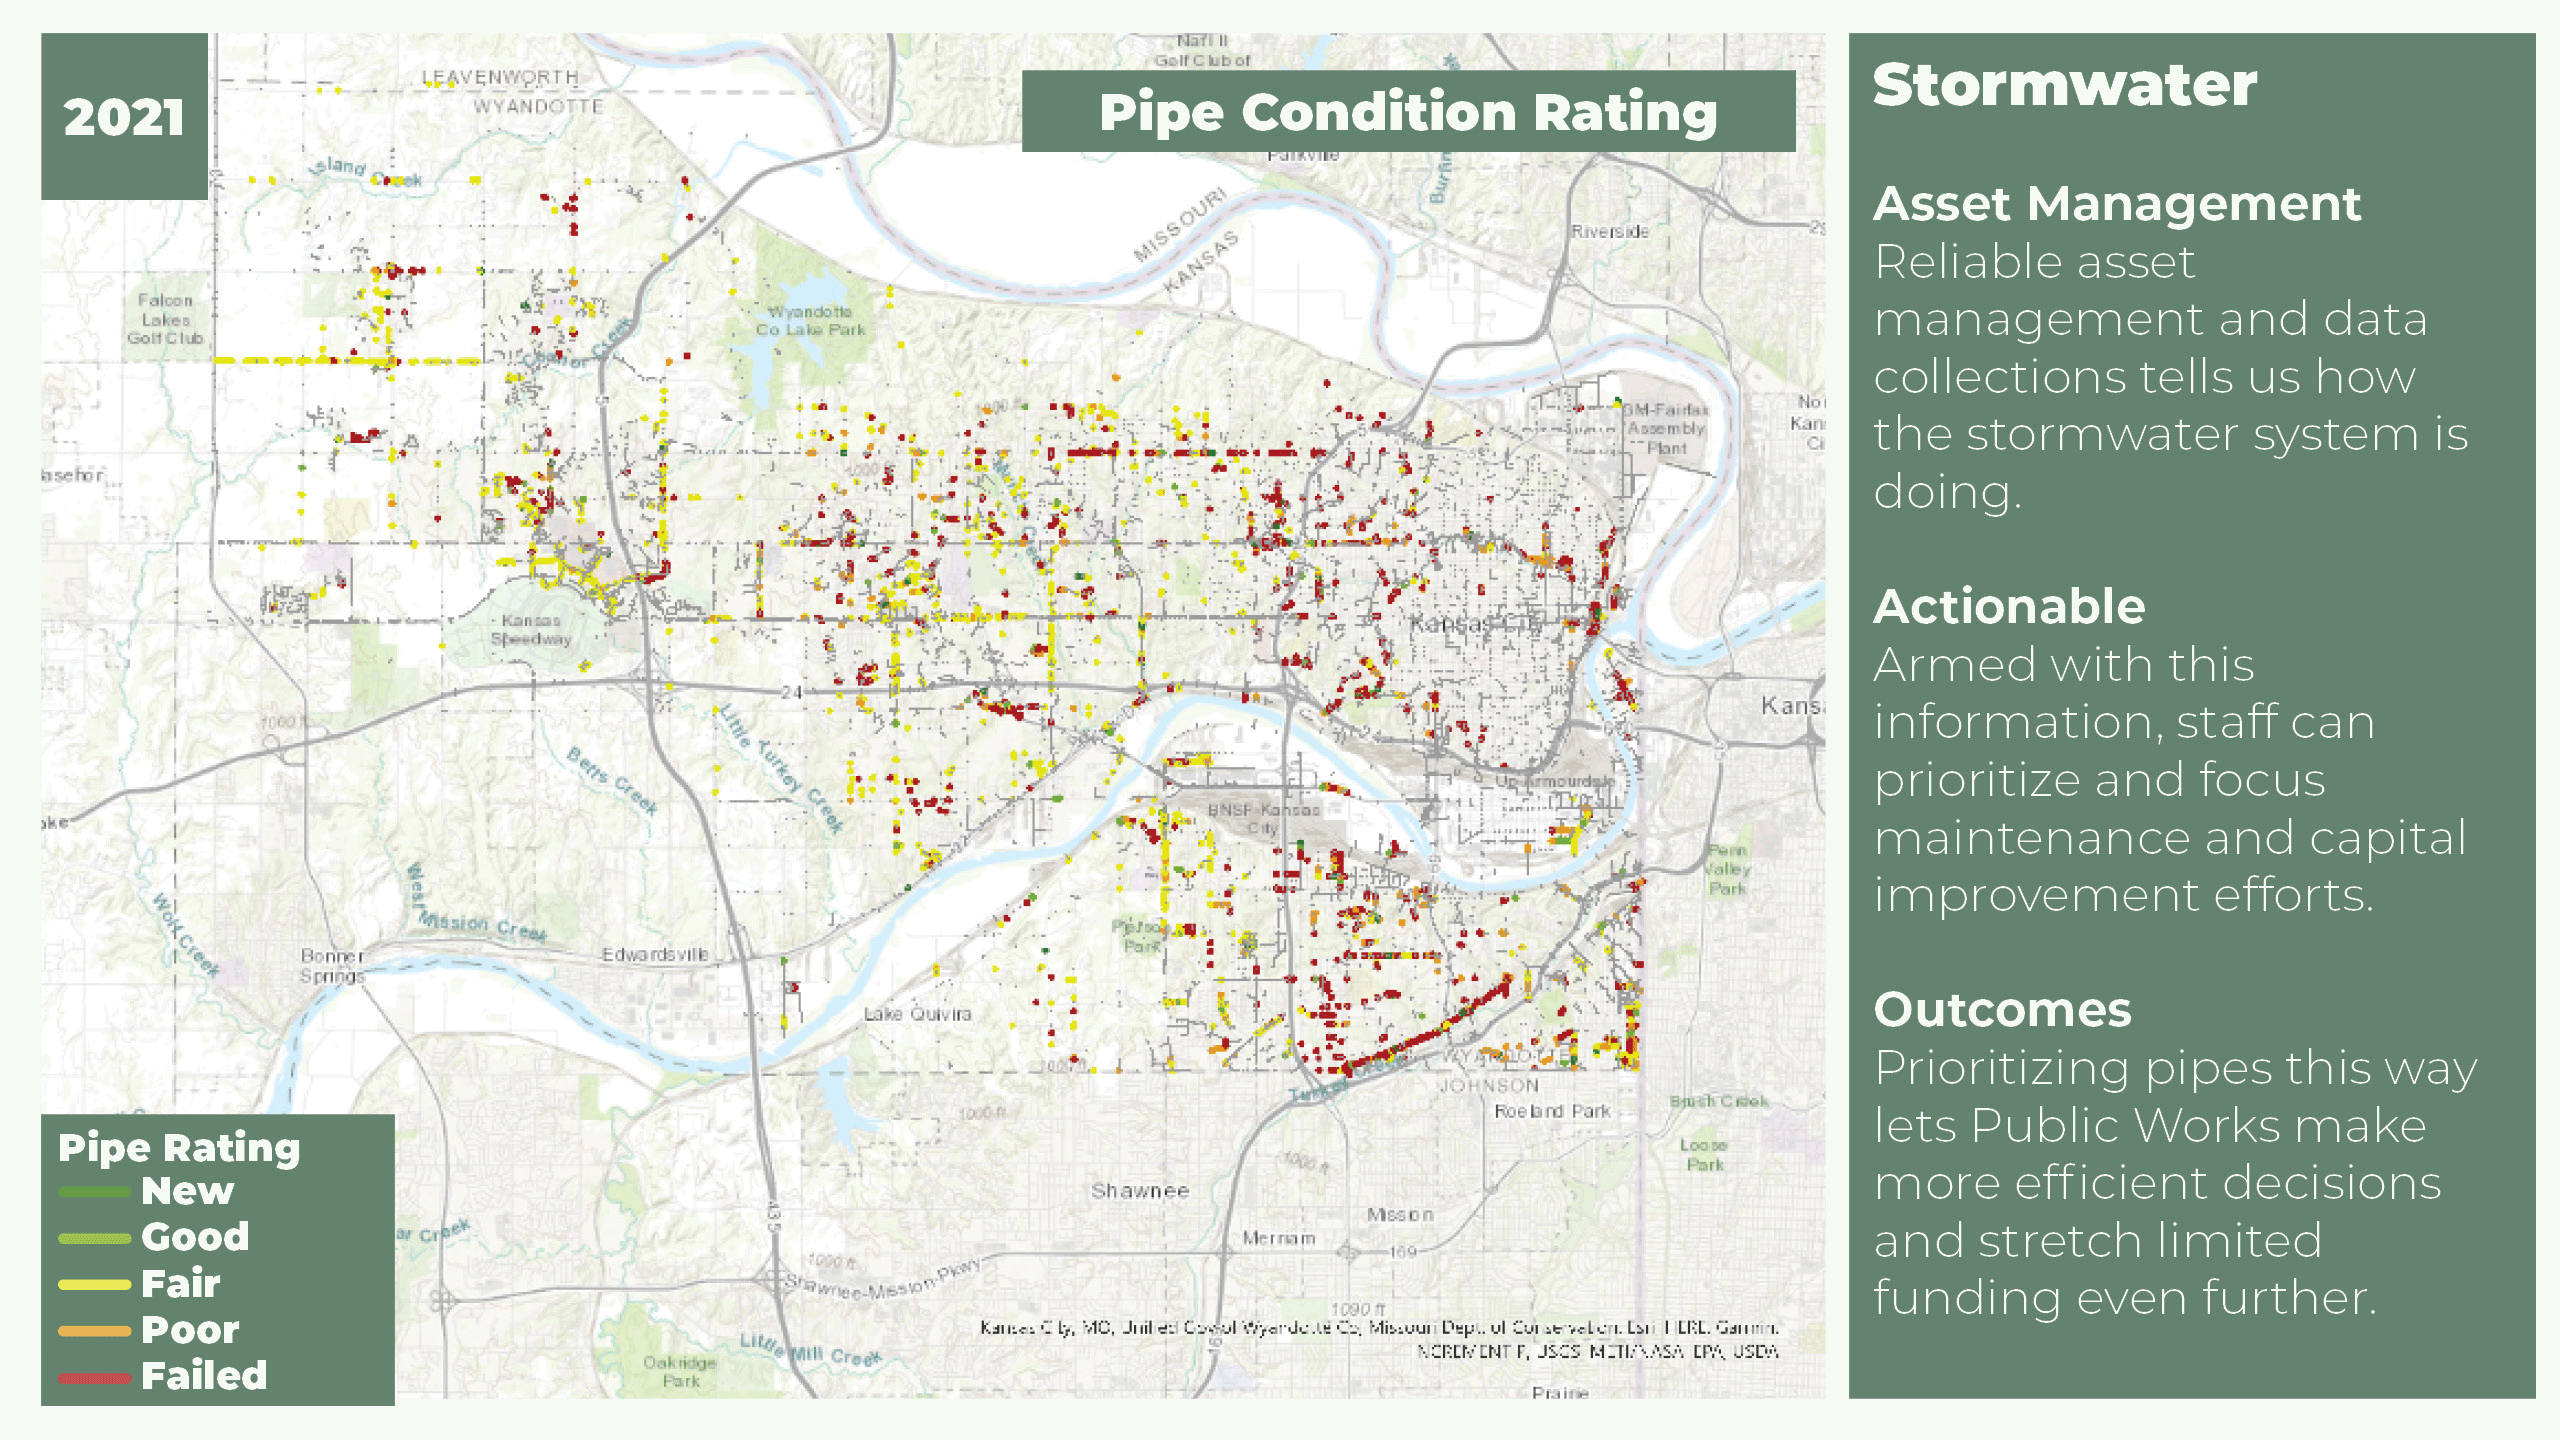 Stormwater Pipe Condition Rating GIF from 2021 to 2031